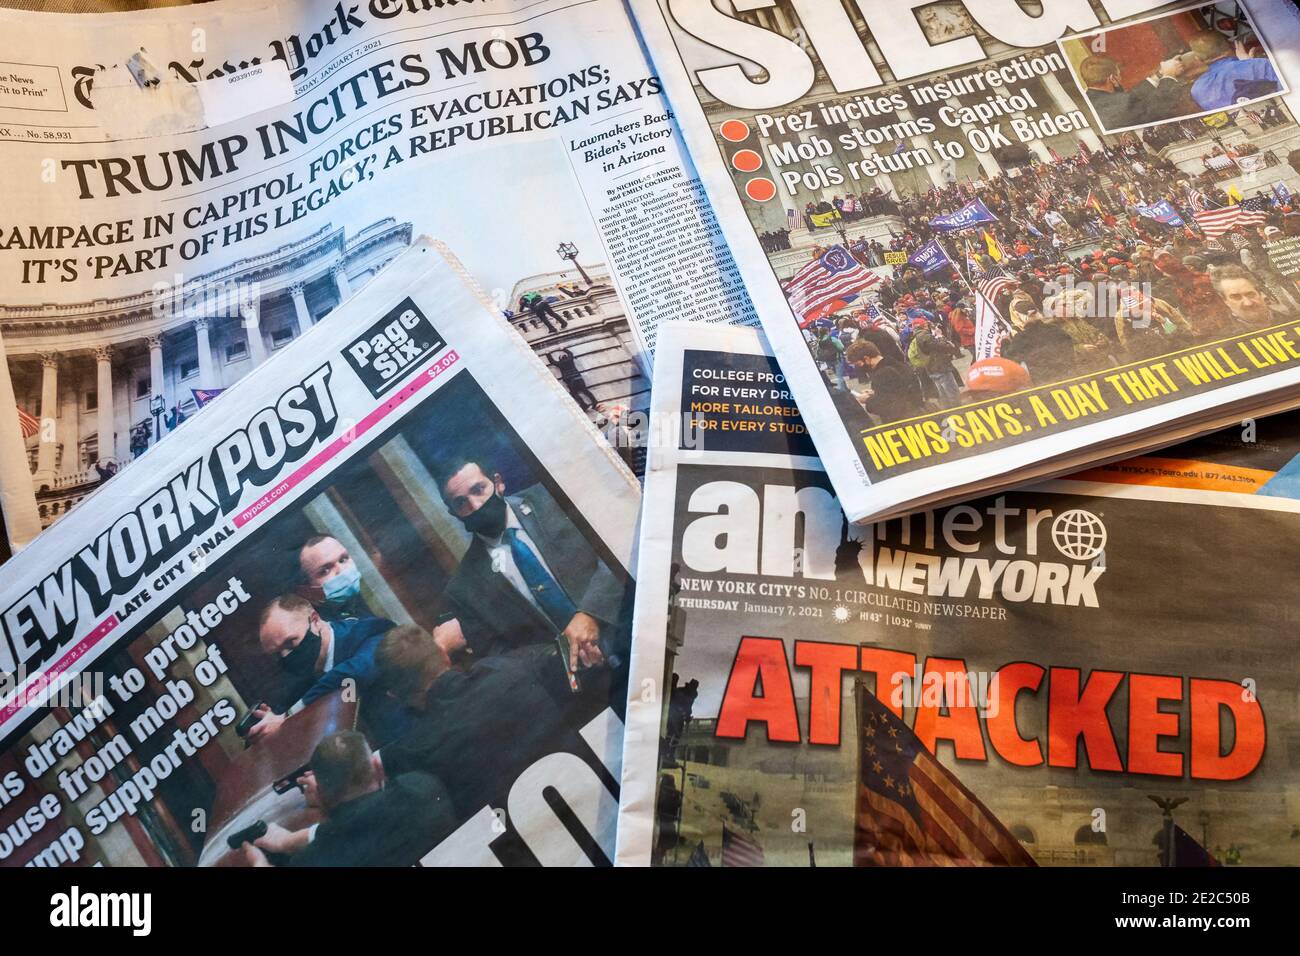 Front pages and headlines of the New York newspapers on Thursday, January 7, 2021 report on the previous days’ attack on the US. Capitol by Trump supporters interrupting the electoral vote certification.. (© Richard B. Levine) Stock Photo